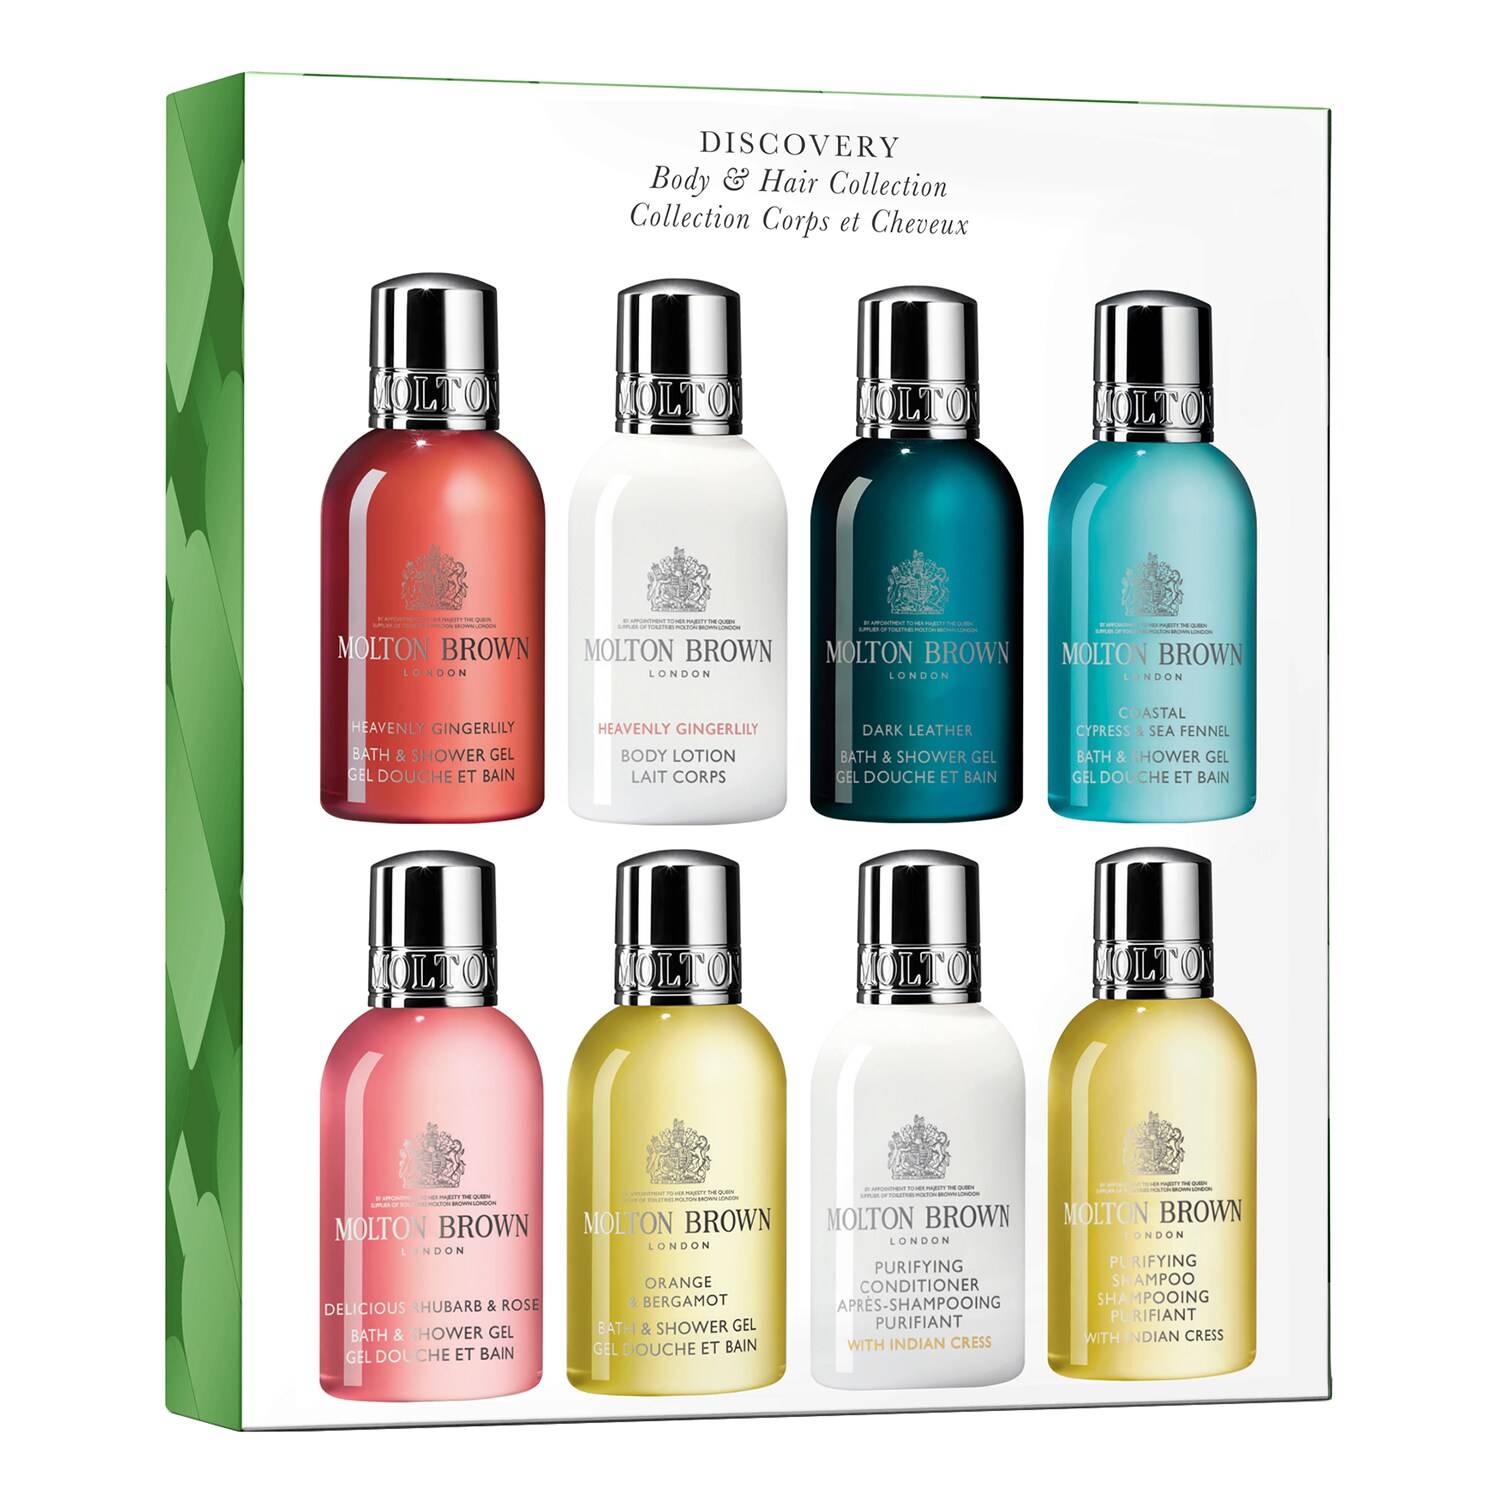 Molton Brown Discovery Body & Hair Gift Set